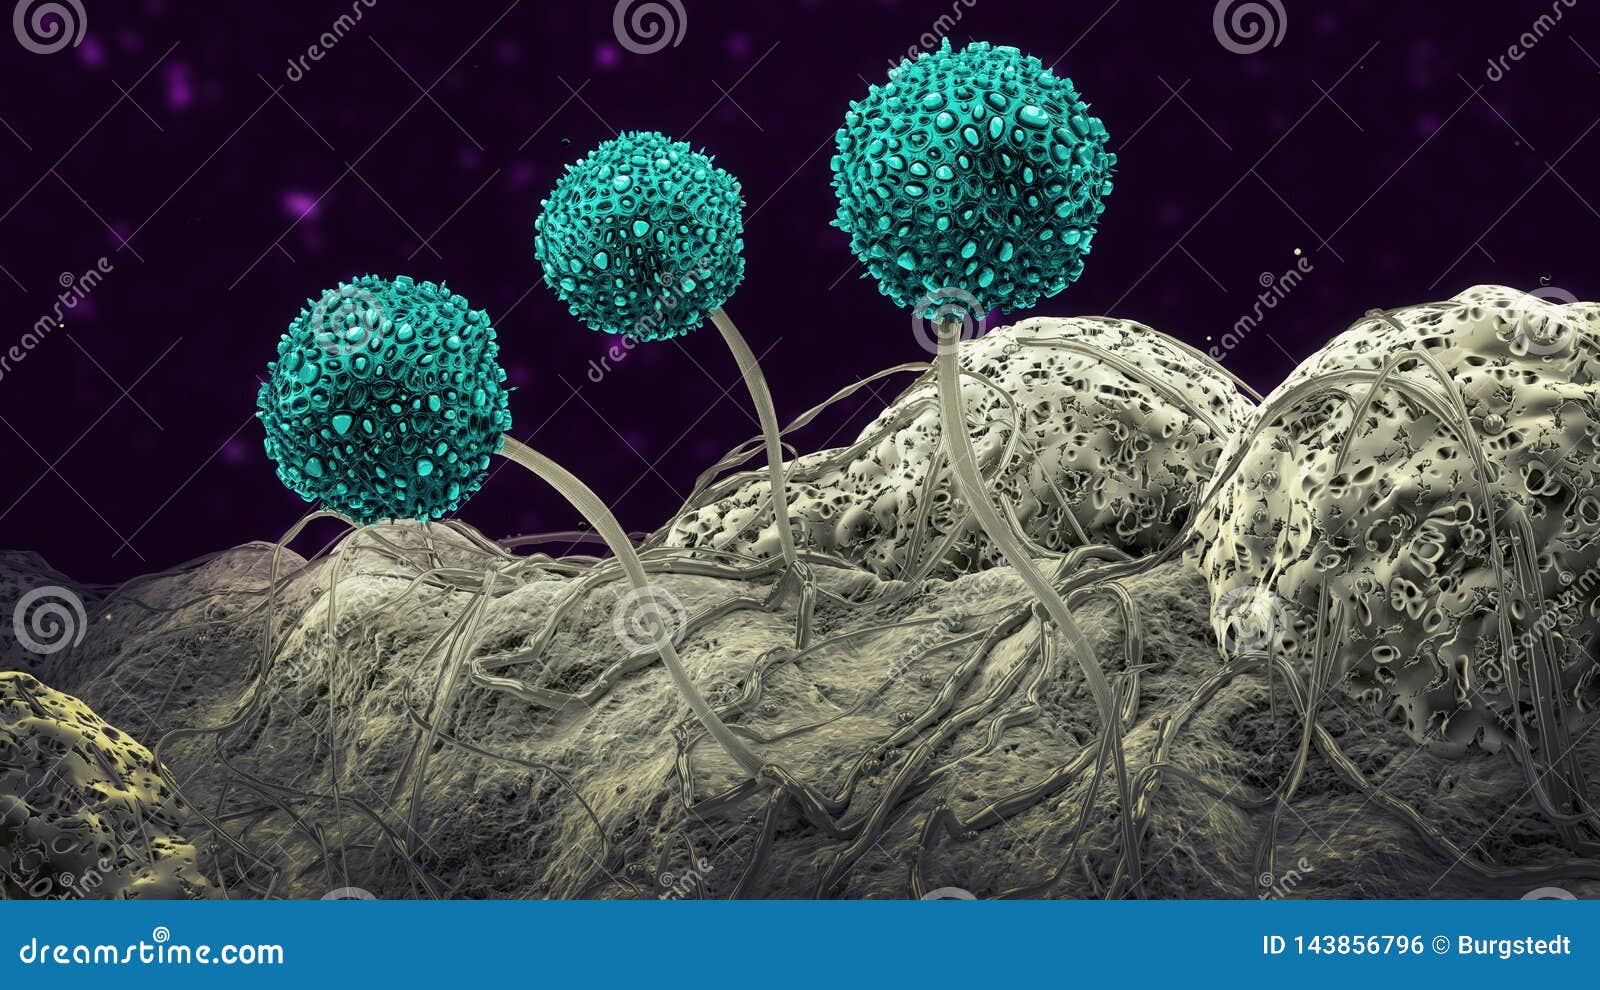 Microscopic Image Of Growing Molds Or Mold Fungus And Spores Stock Photo Image Of Fungus